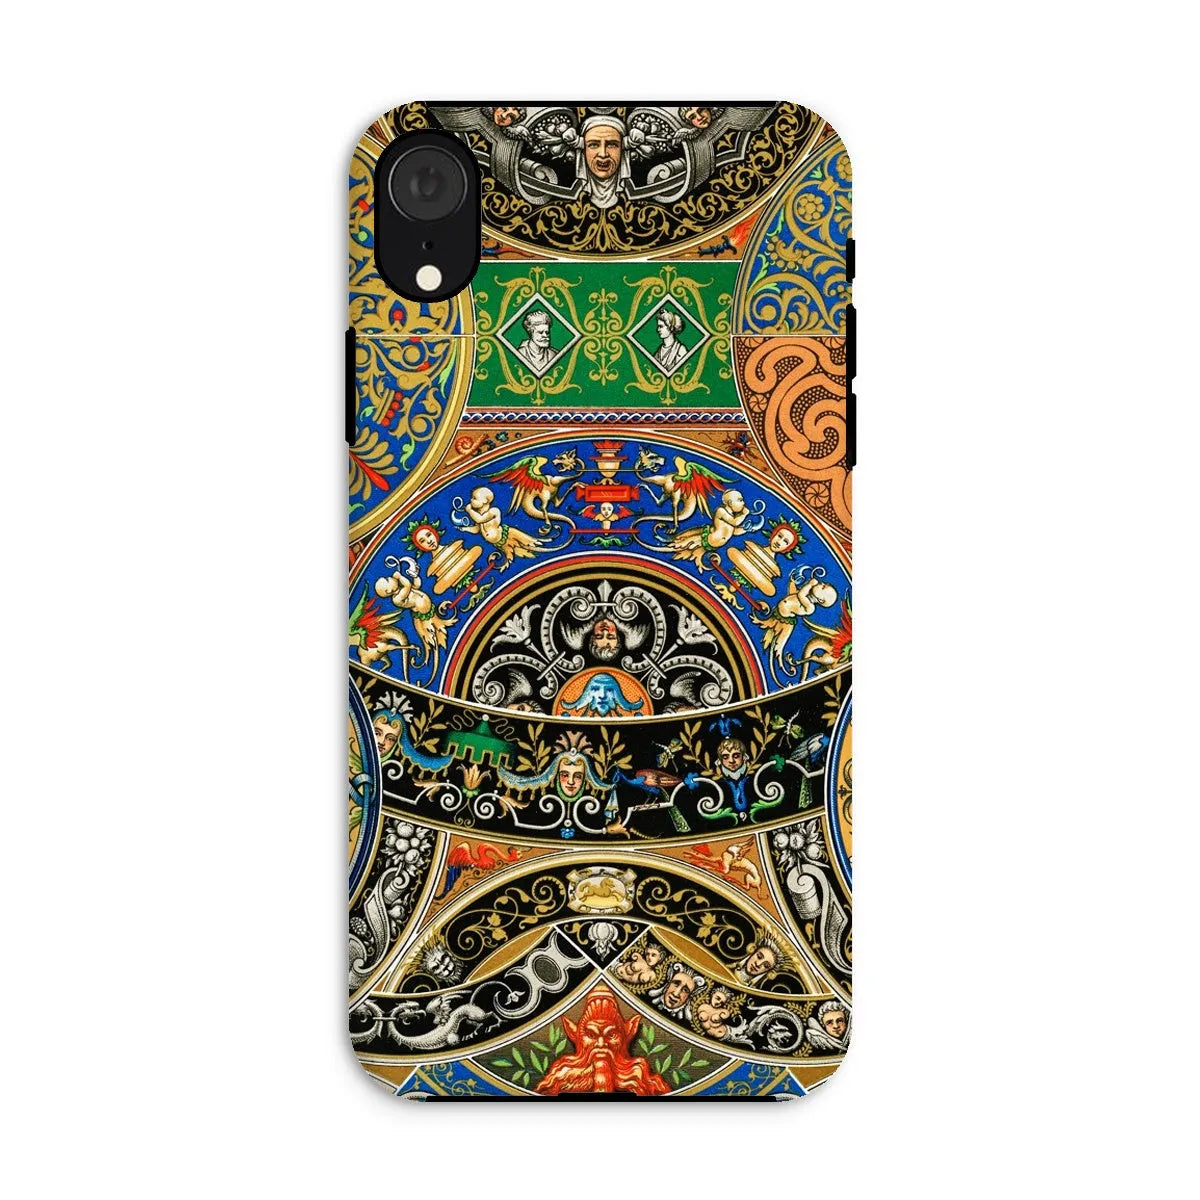 Renaissance Pattern 2 By Auguste Racinet Tough Phone Case - Iphone Xr / Gloss - Mobile Phone Cases - Aesthetic Art